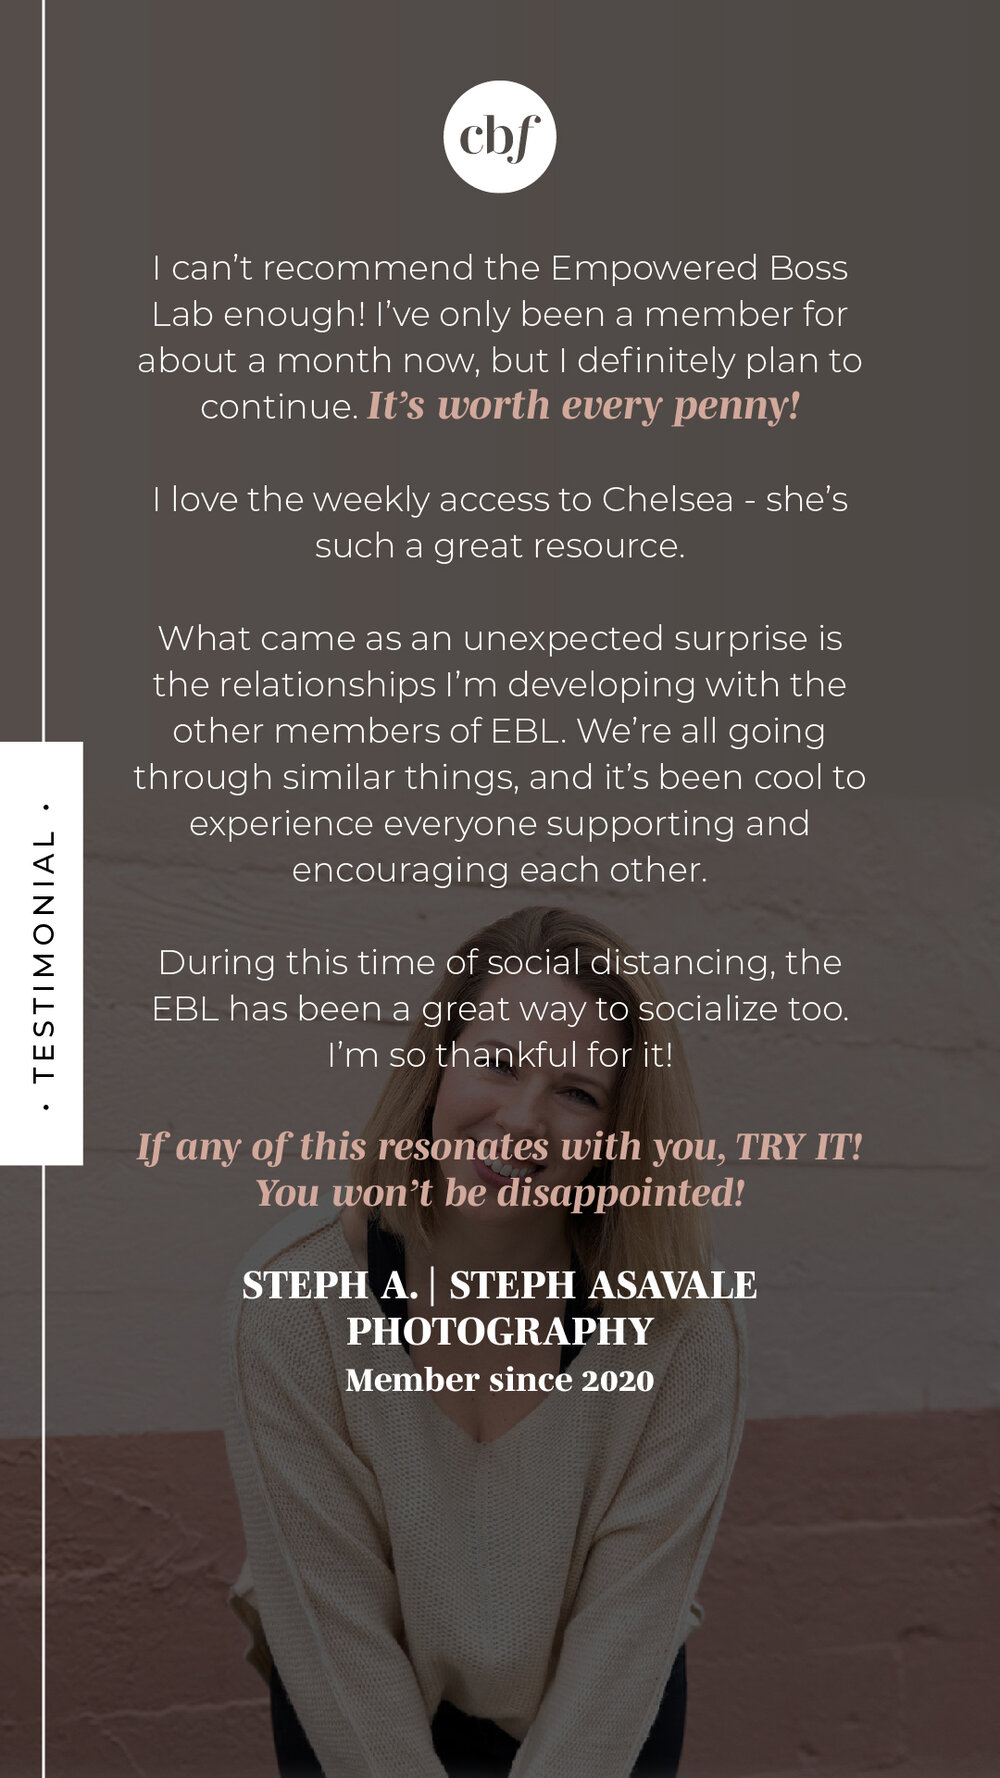 The Empowered Boss Lab by Chelsea B Foster | Testimonial from Steph A. of Steph Asavale Photography, member since 2020